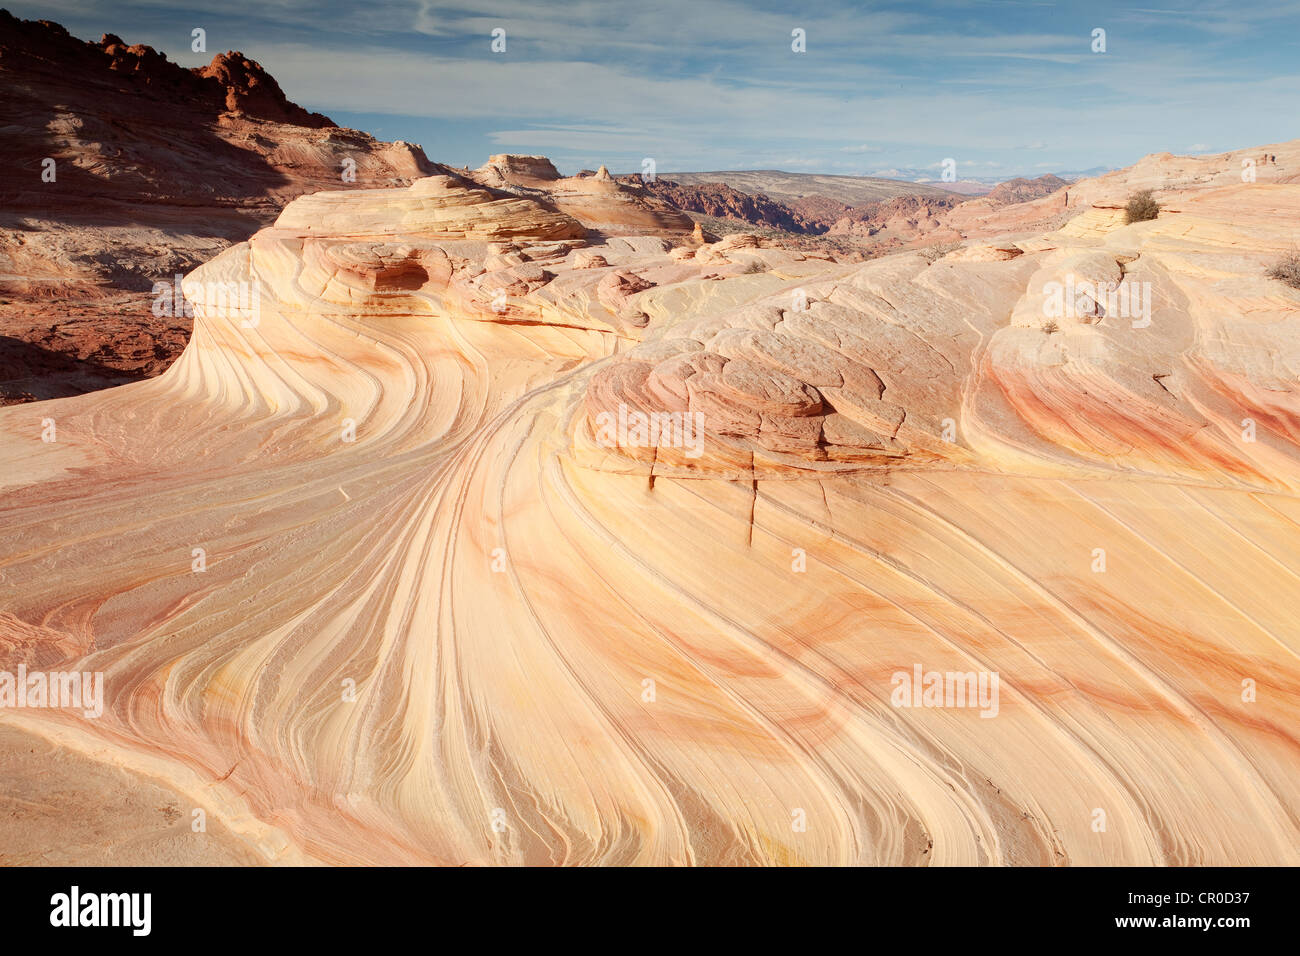 Sand dunes turned into rock, sandstone formations, Coyote Buttes North, Paria Canyon-Vermilion Cliffs Wilderness, Page, Arizona Stock Photo